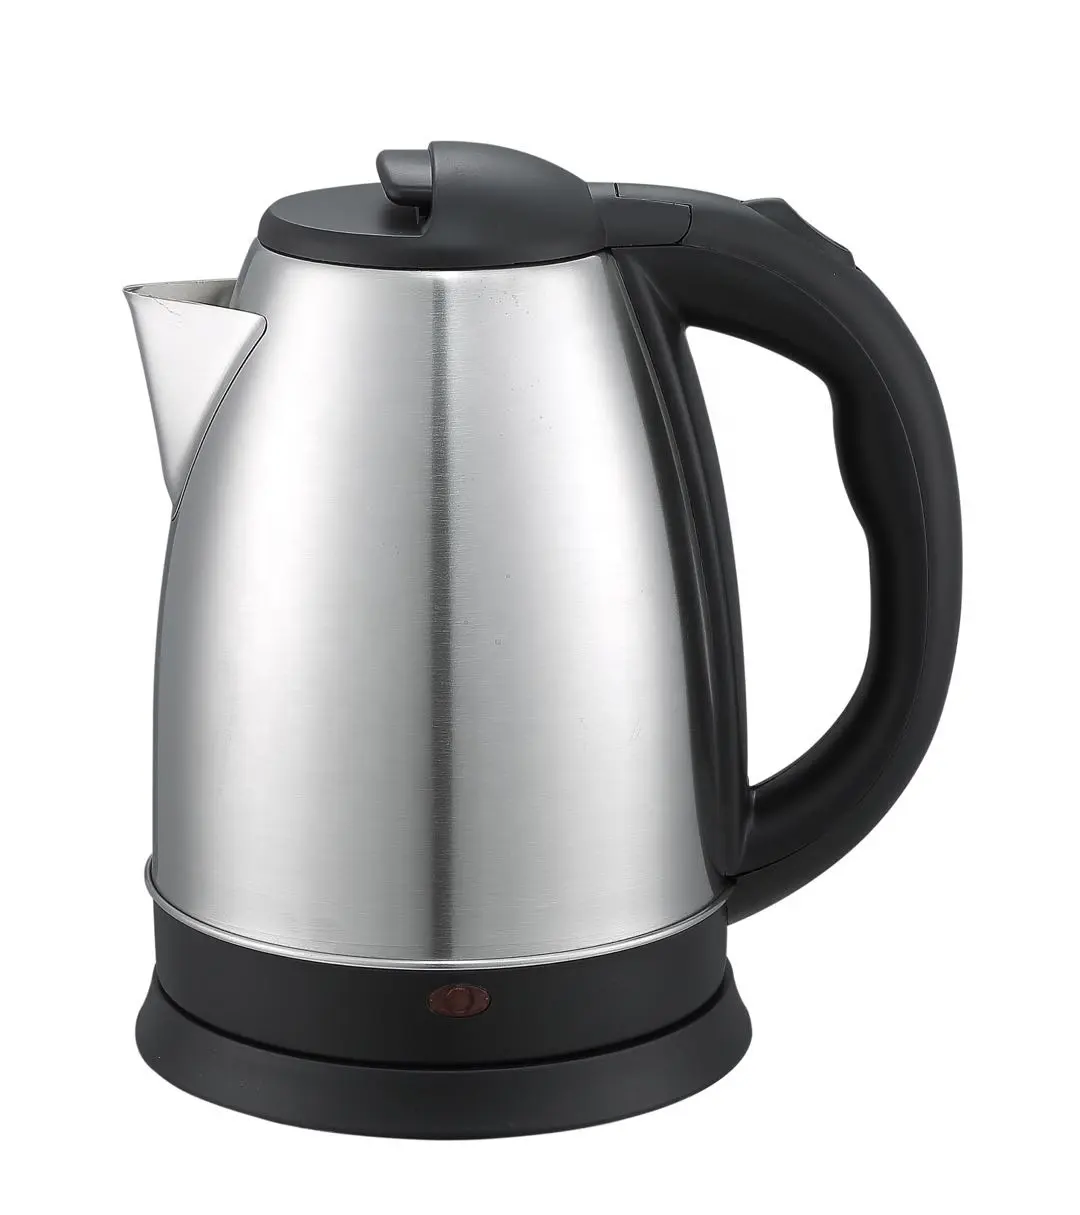 Household appliances promotion low price stainless steel electric kettle 1.5L 1.8L